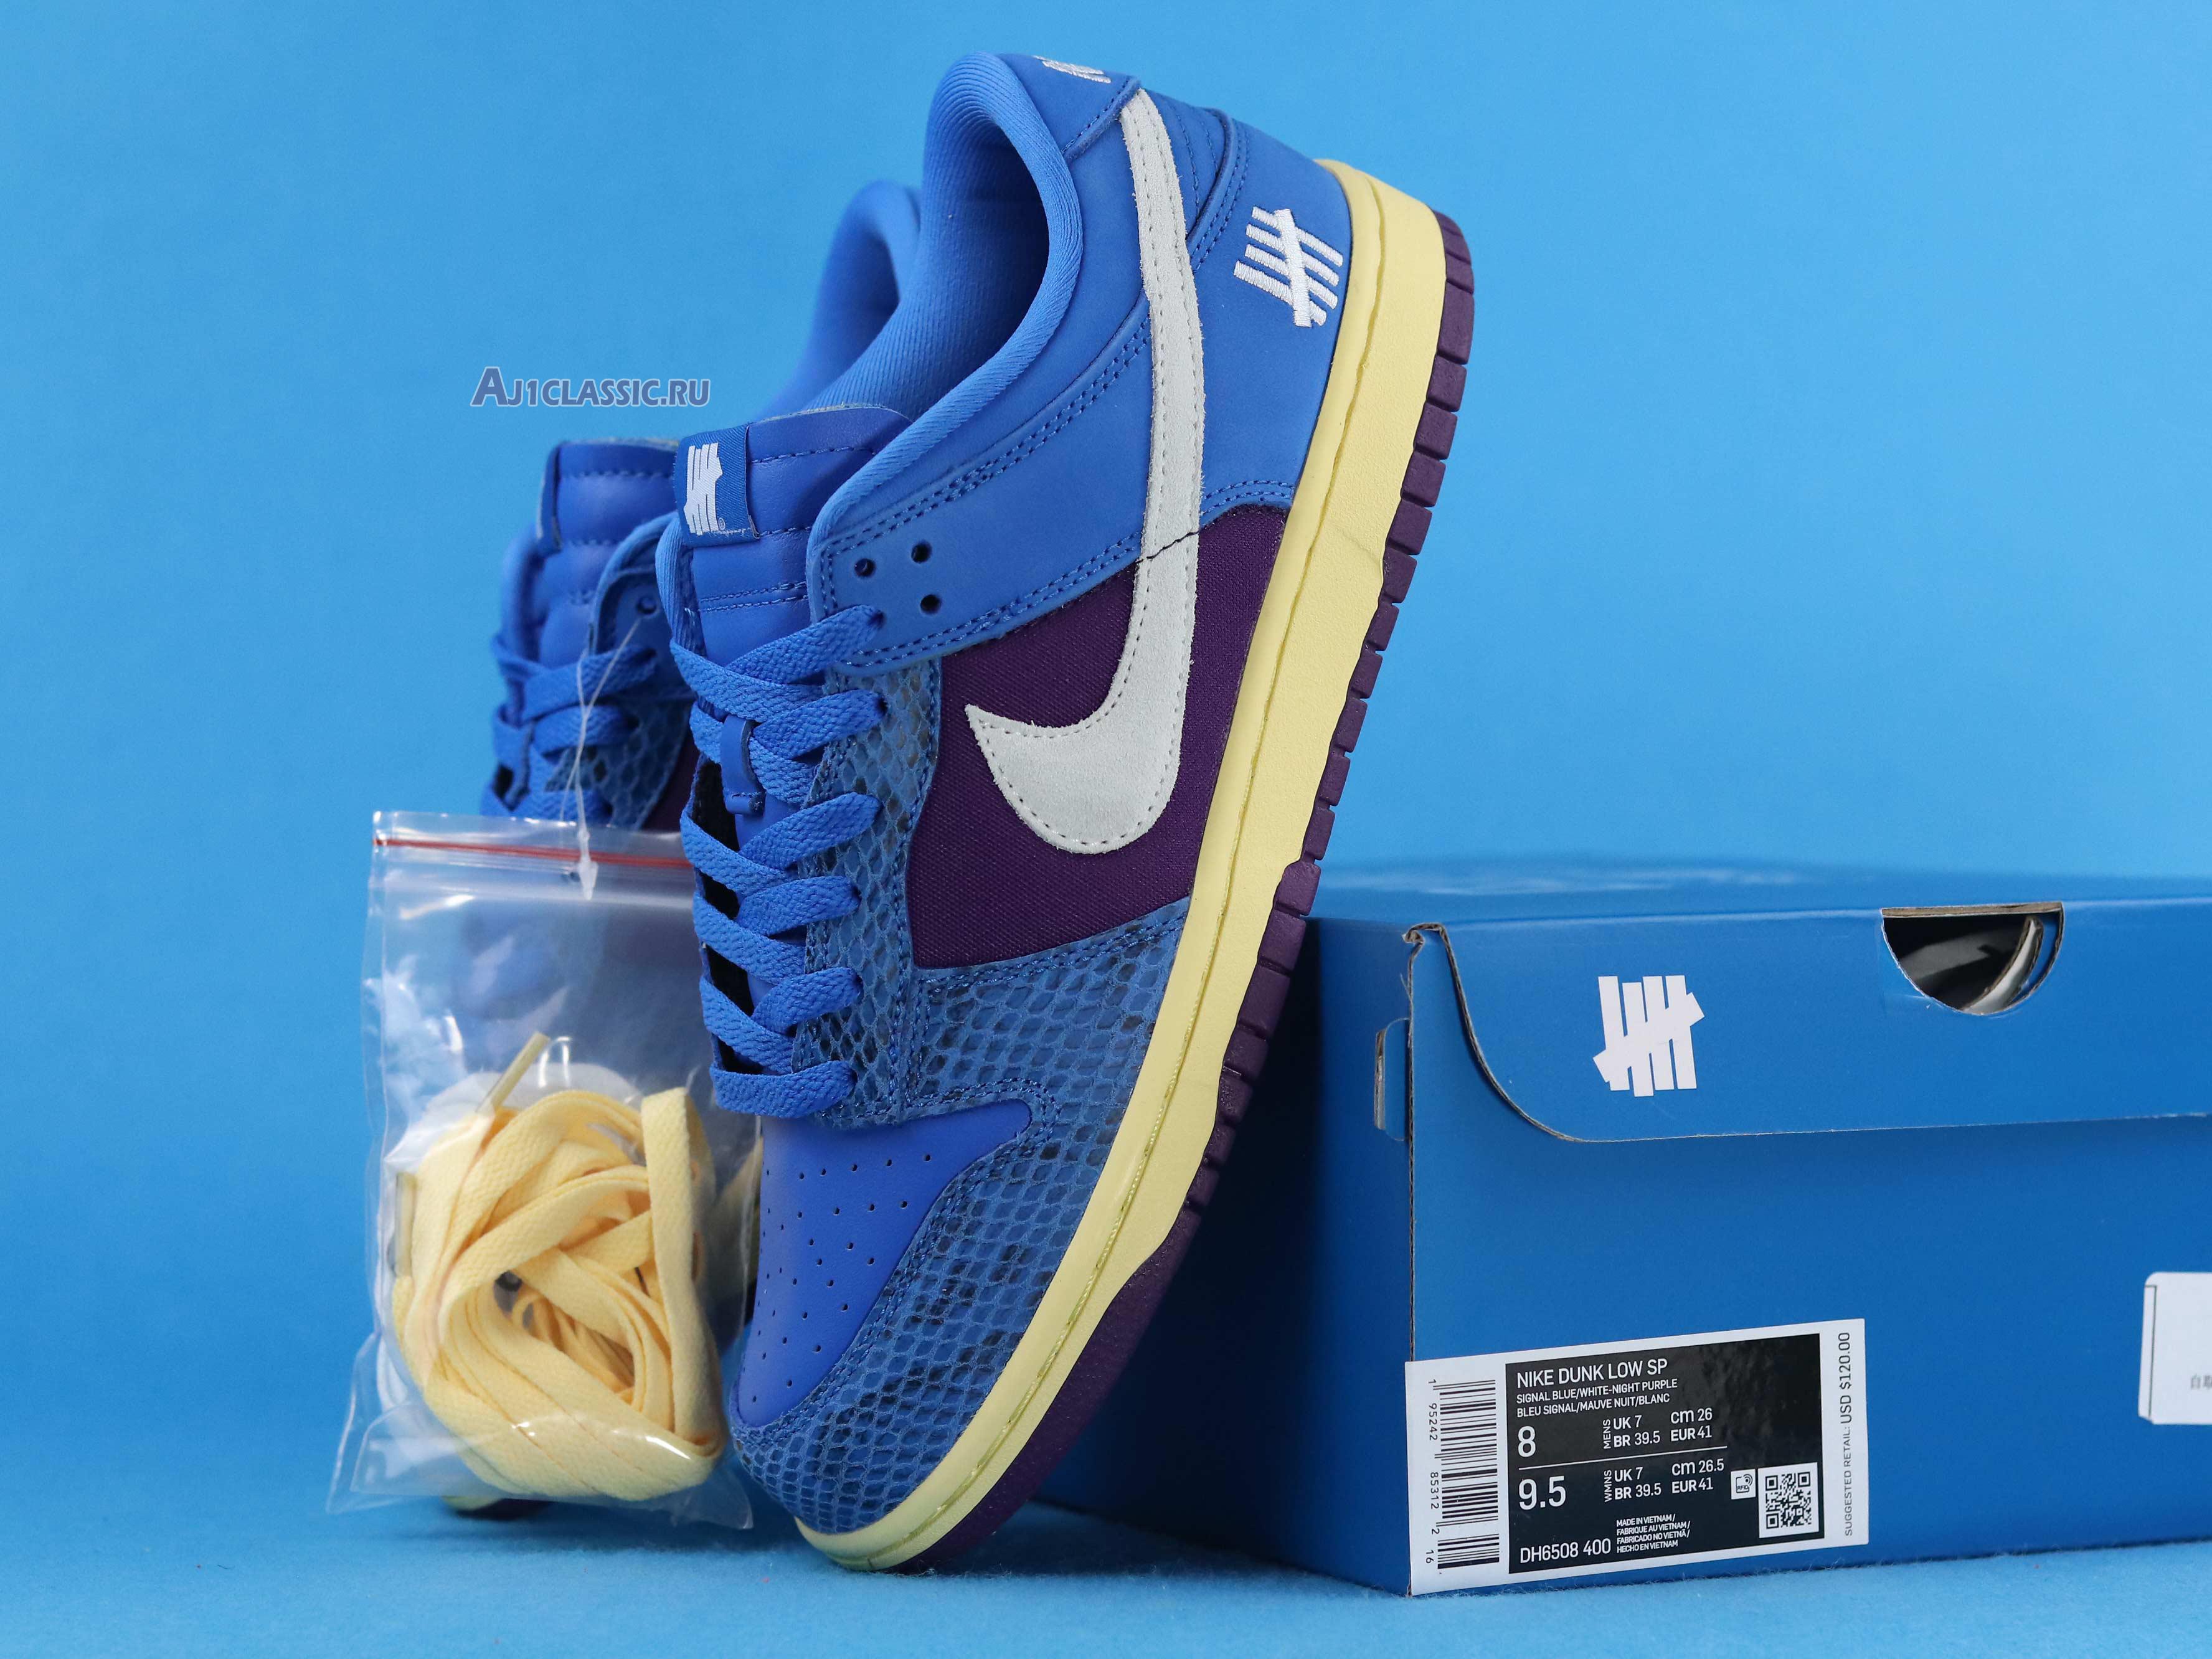 Undefeated x Nike Dunk Low SP Dunk vs AF1 DH6508-400 Royal/Purple-White Sneakers